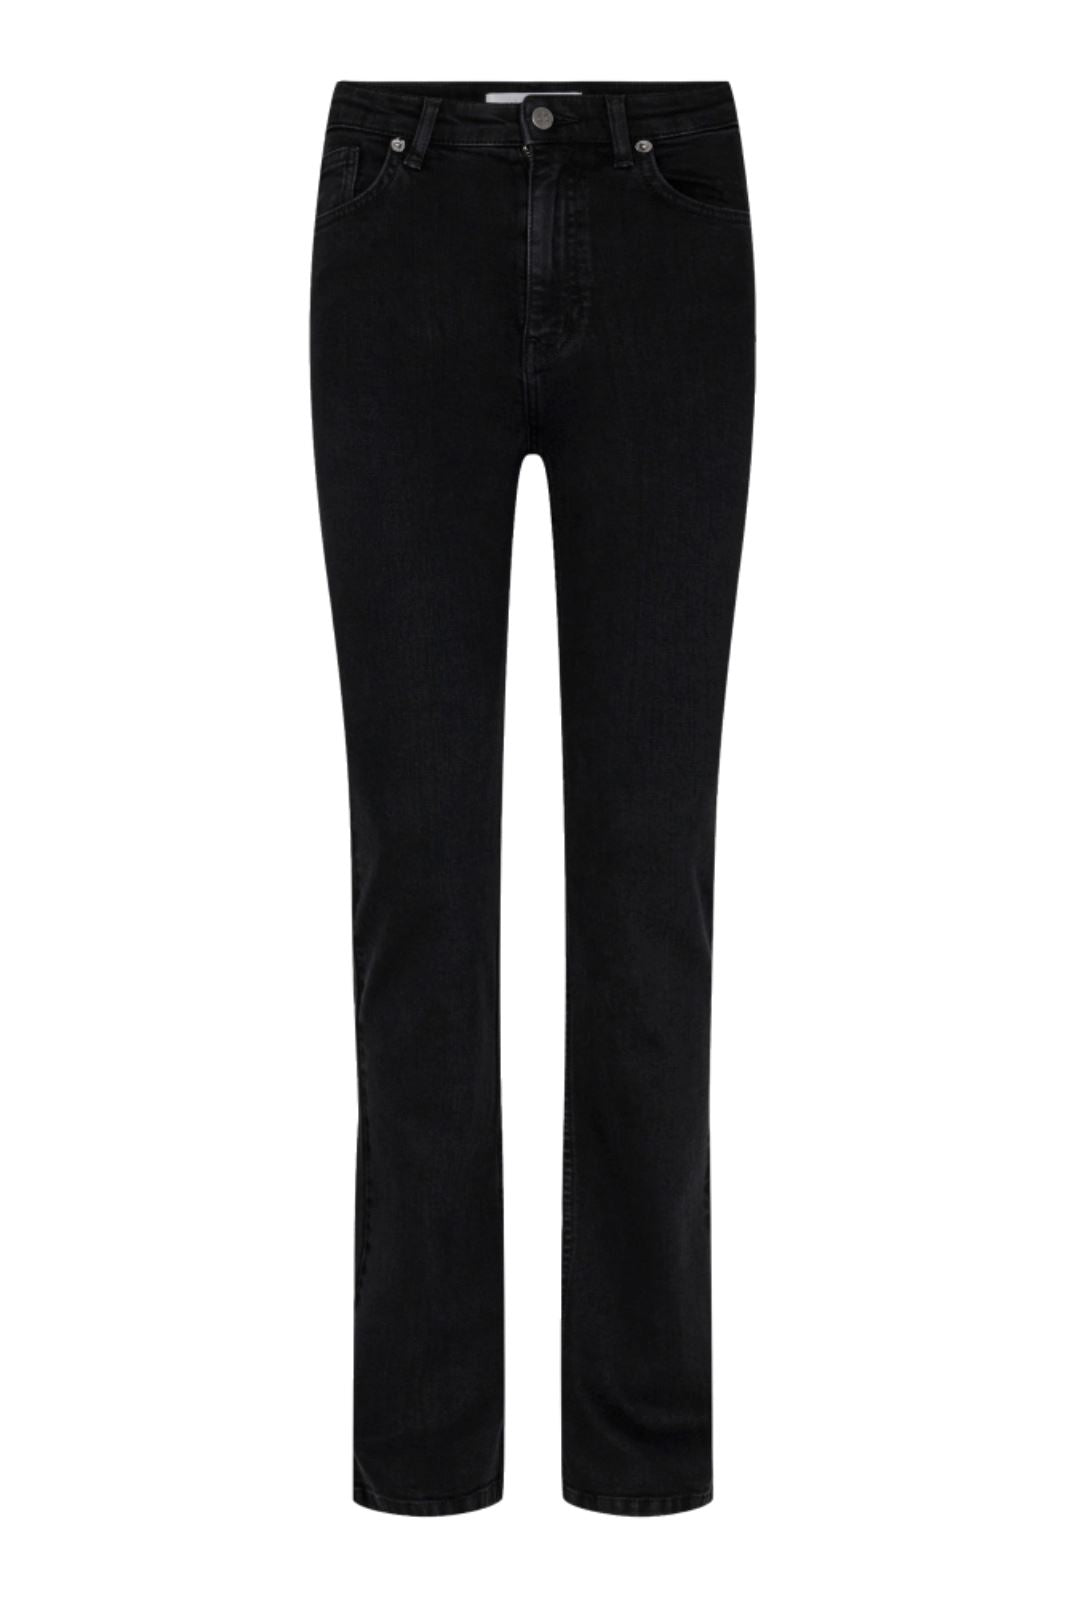 Co´couture - Denny Zip Jeans - Black Jeans 